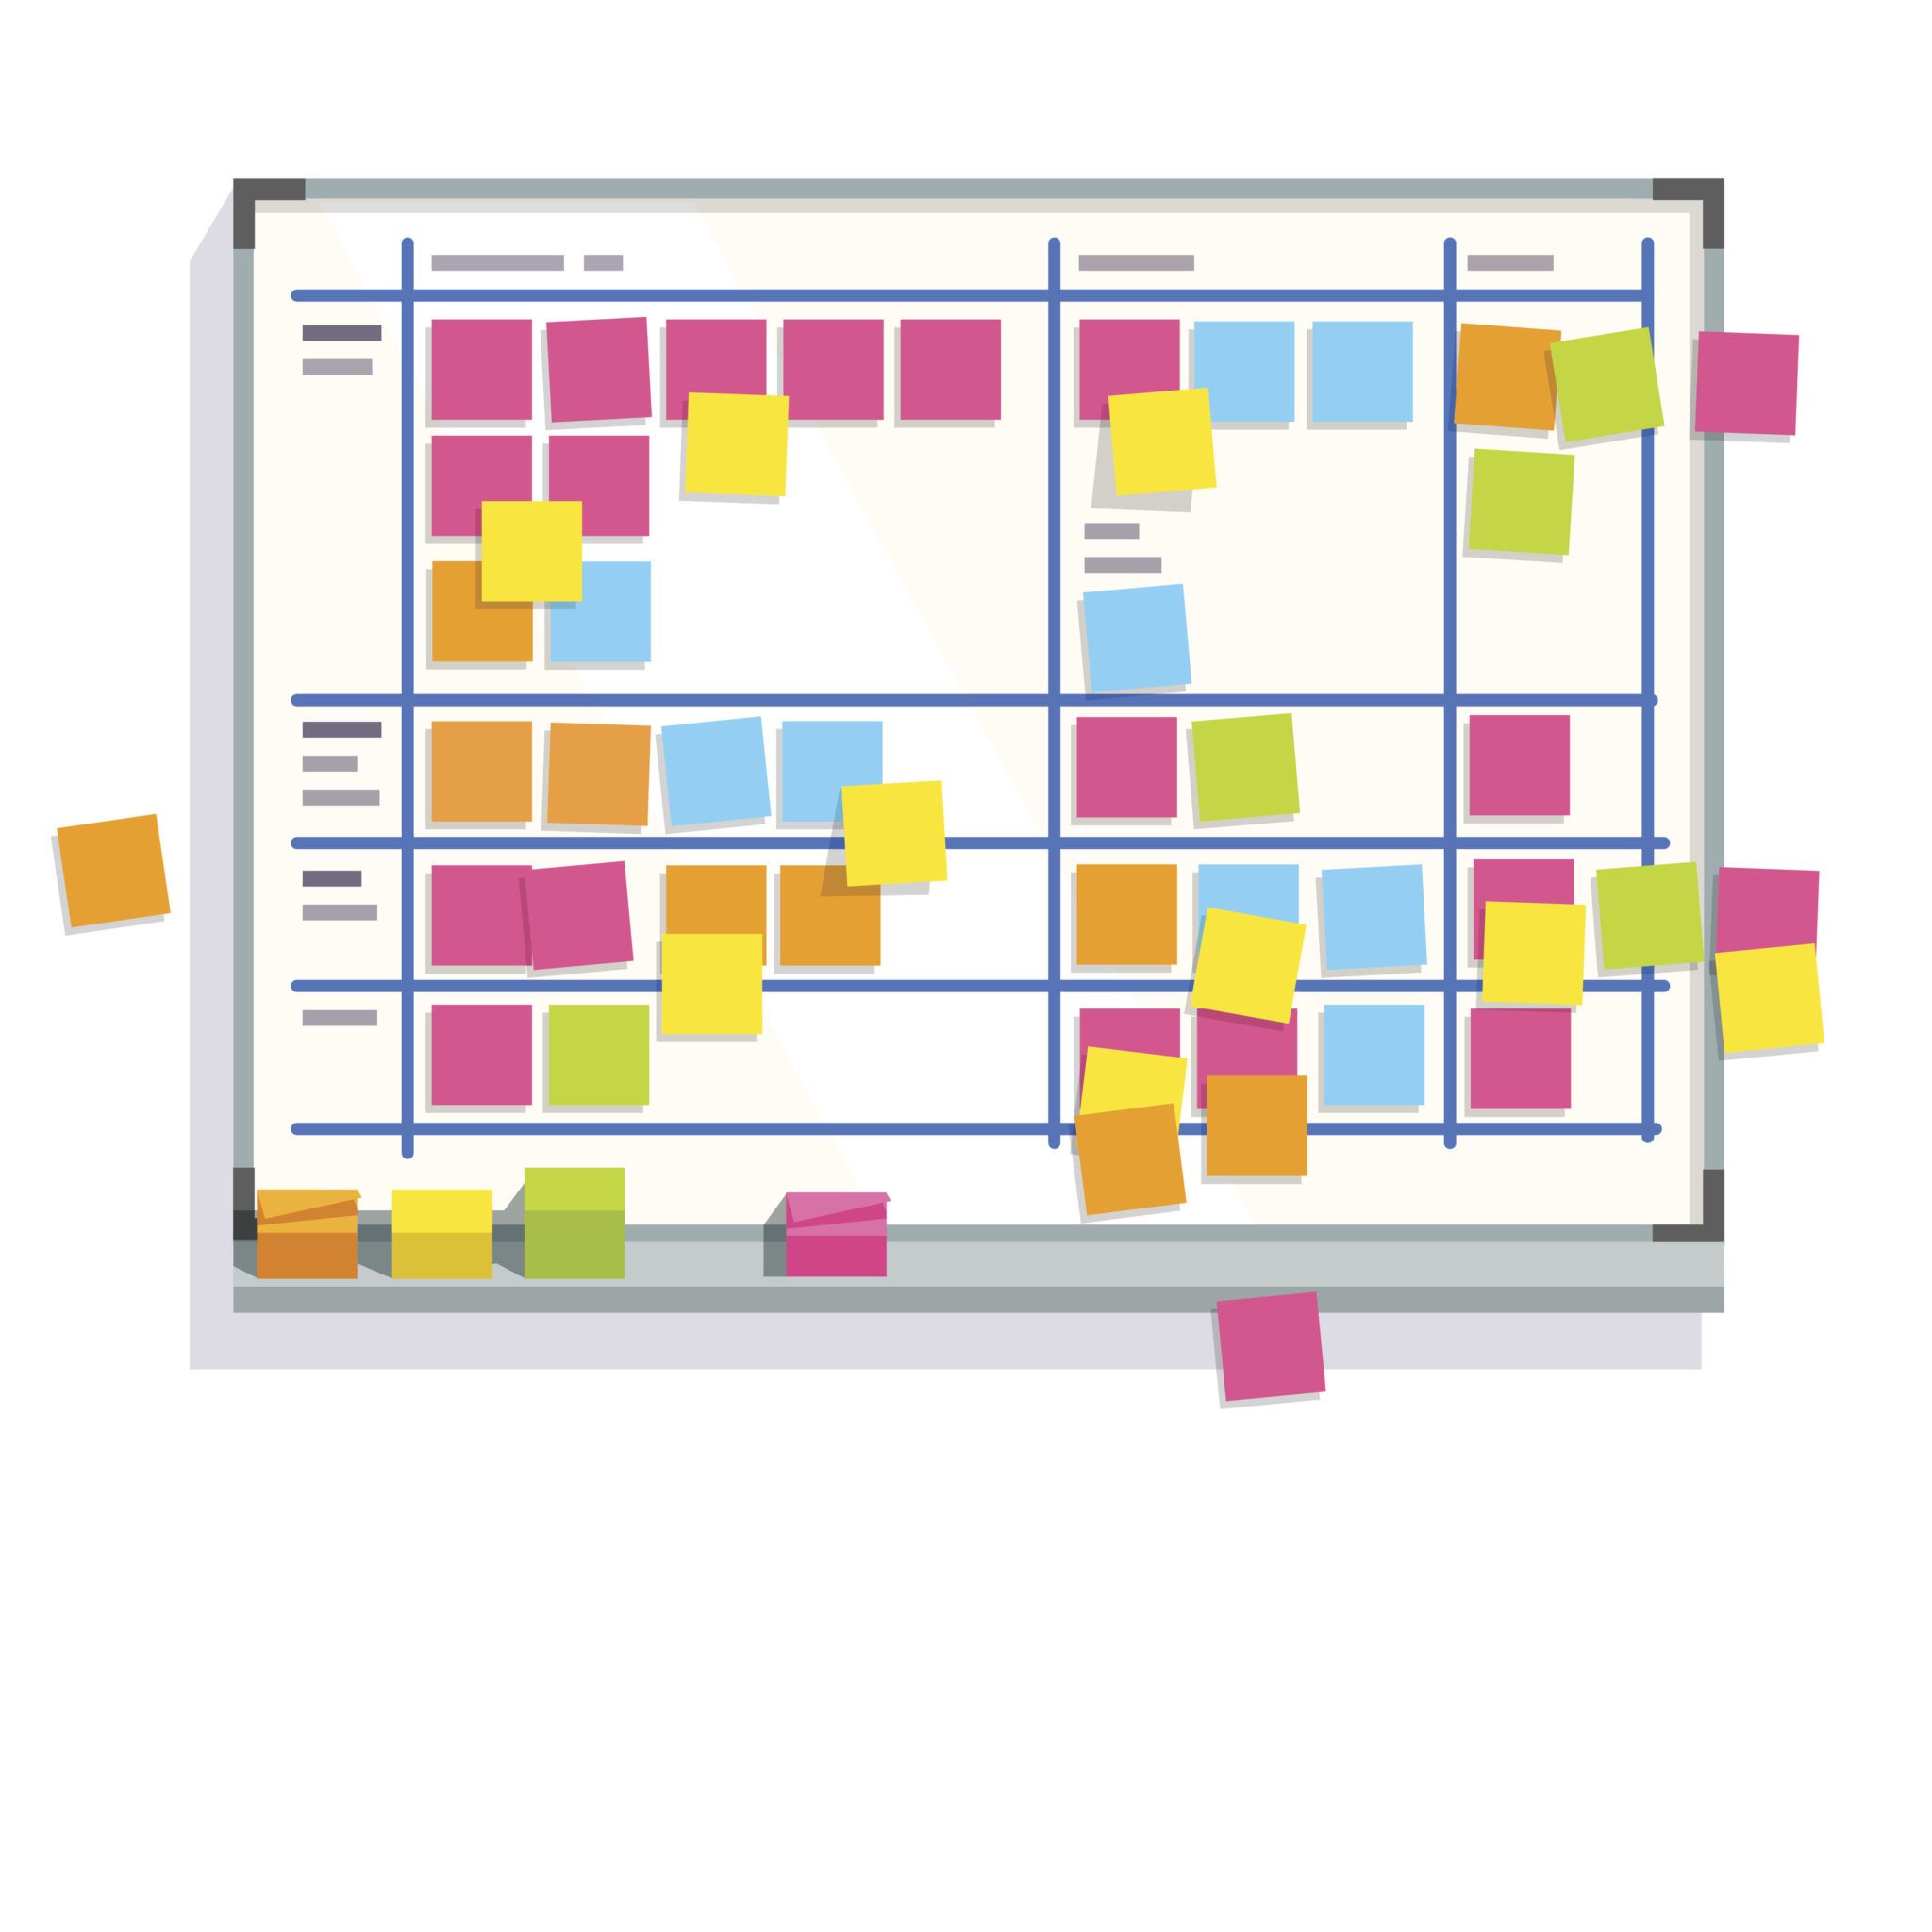 Don’t let exhaustive project charts turn your stand-ups into sit-downs. Learn how Kanban boards can help boost your team’s productivity.